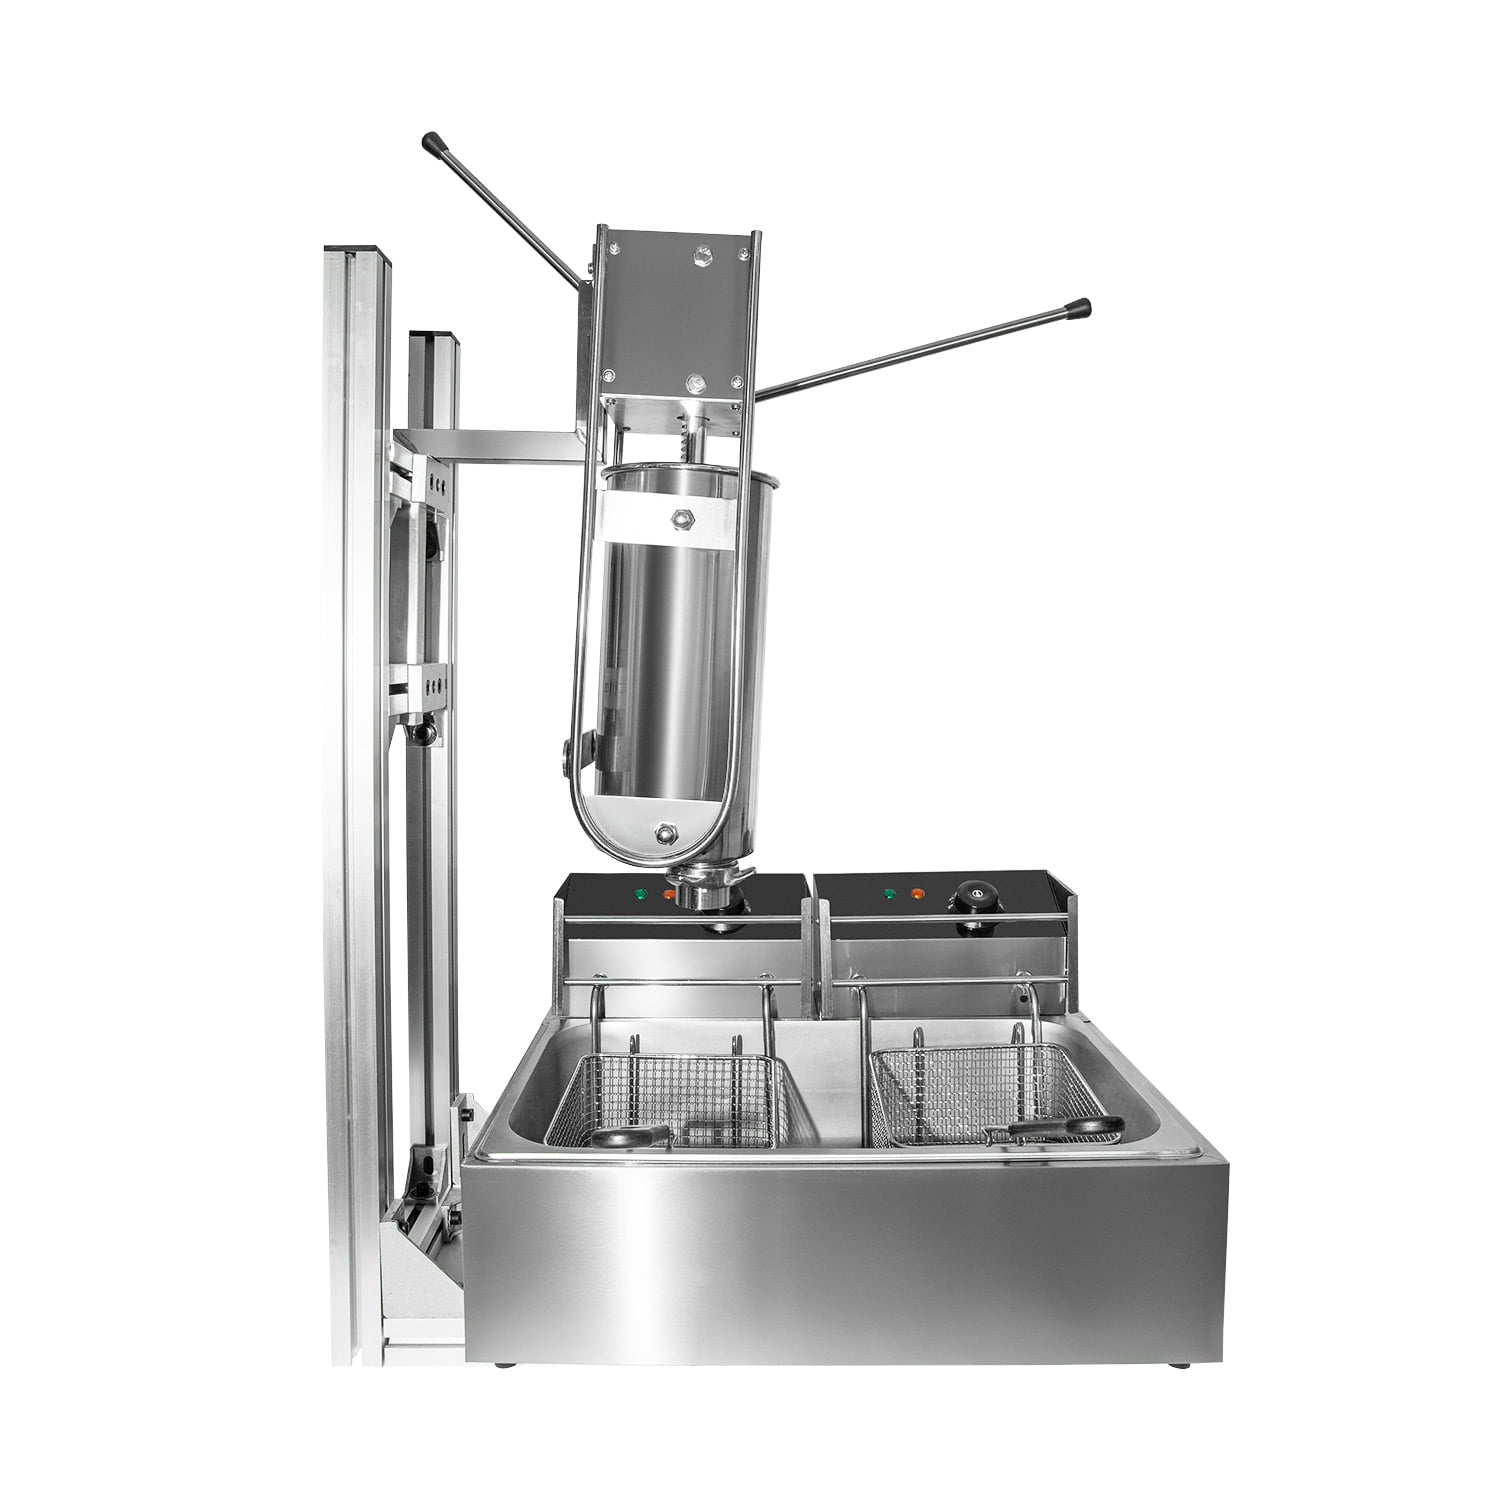 ALDKitchen Churros Machine Manual, Deep-Frying Churro Maker with Working  Stand, Stainless Steel